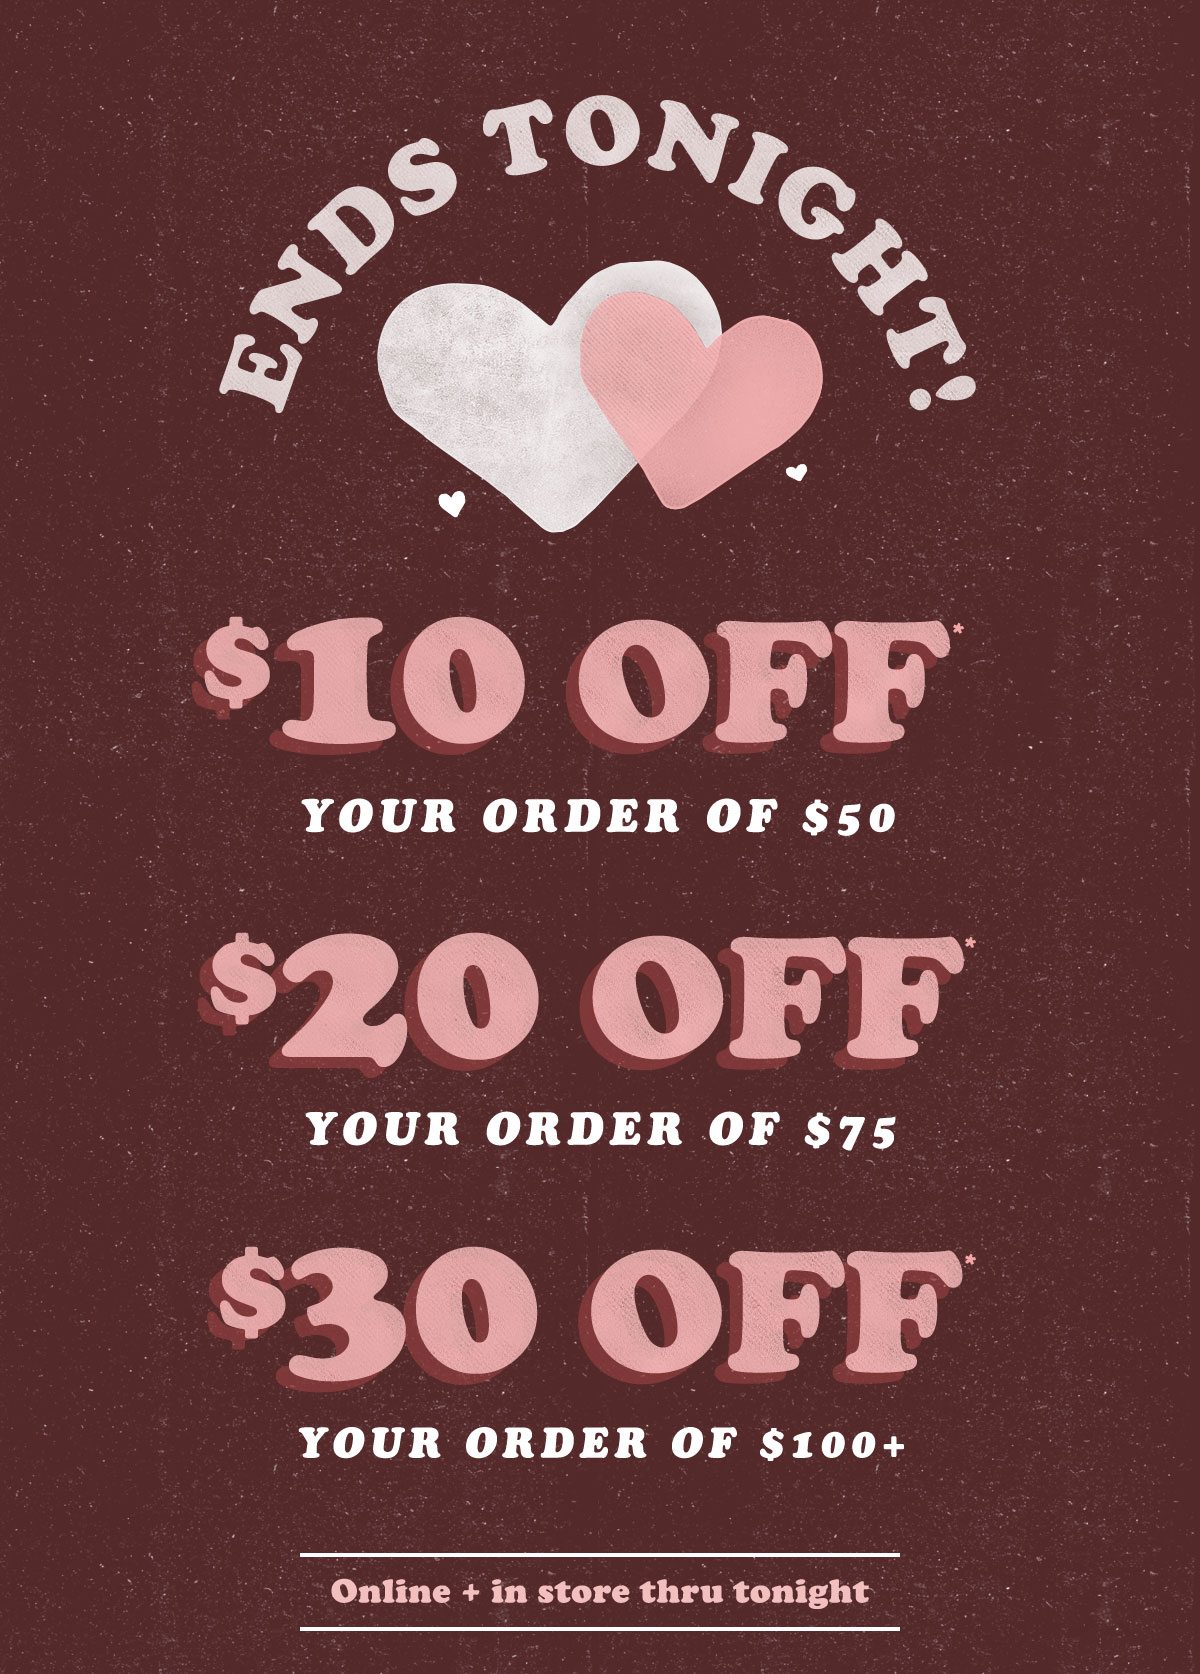 Ends tonight! $10 off* your order of $50. $20 off* your order of $75. $30 off* your order of $100+! Online and in store thru midnight.